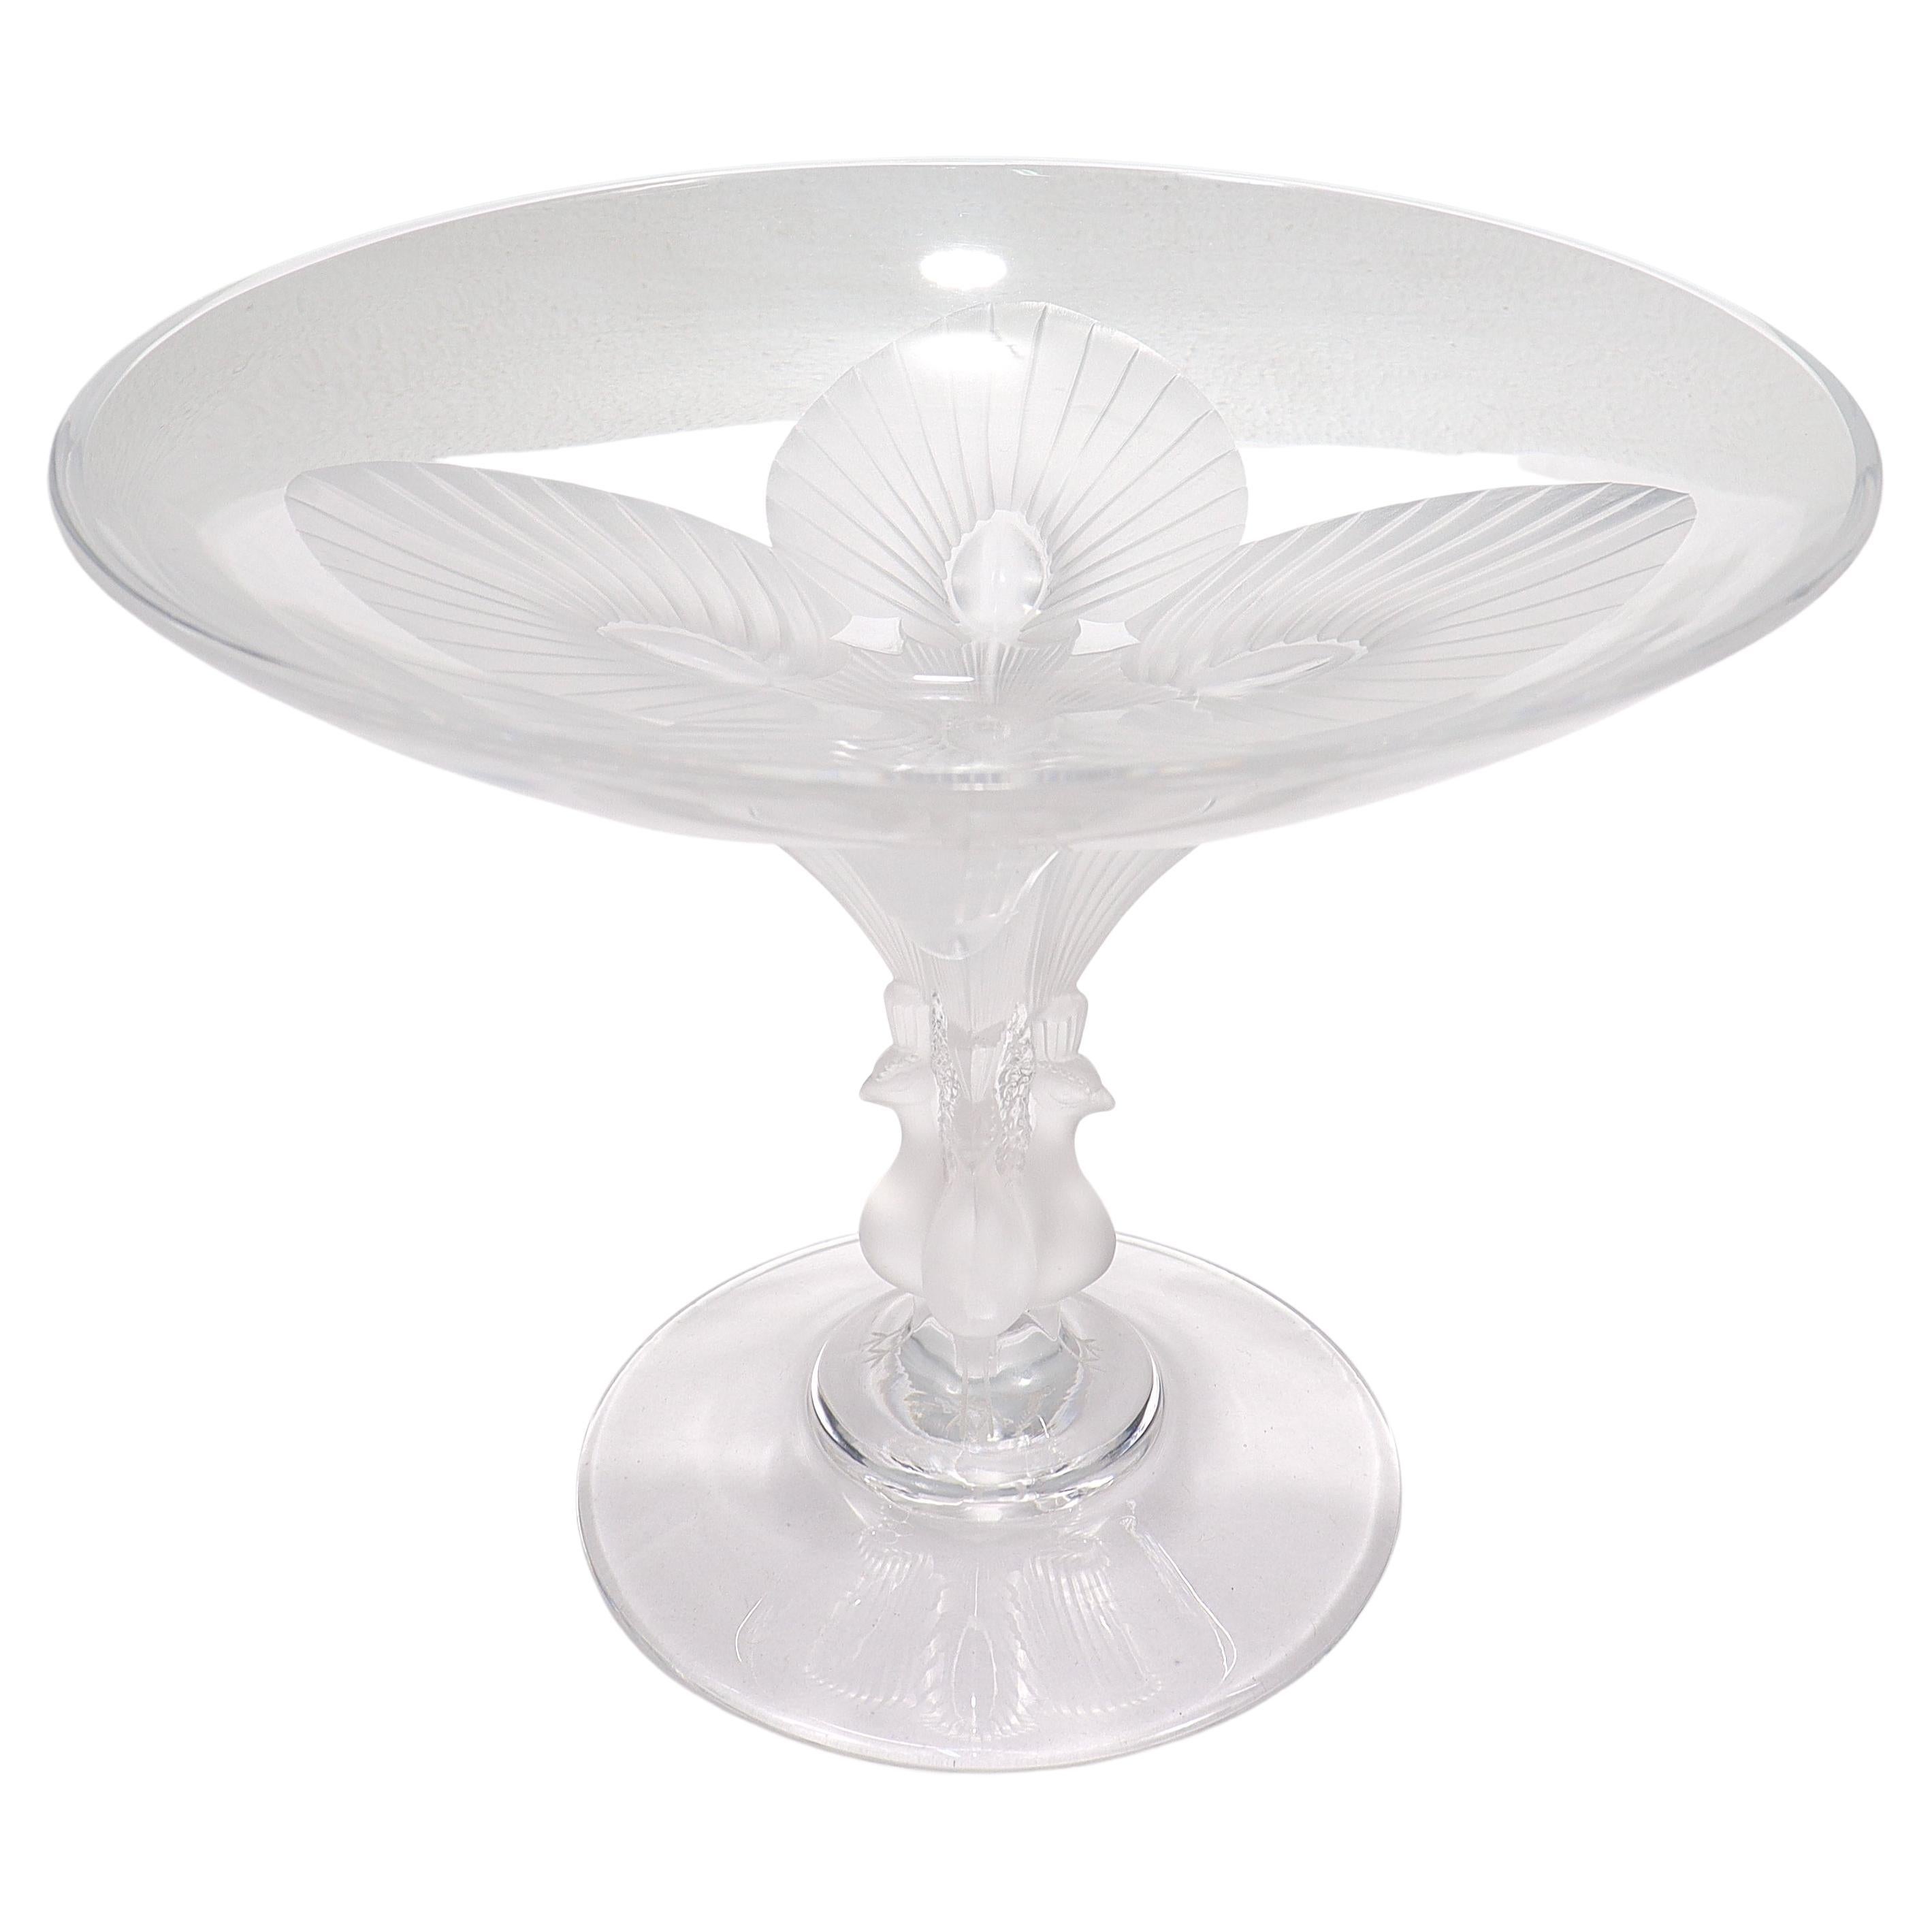 Lalique French Art Glass Virginia Pattern Compote or Tazza with Frosted Peacocks